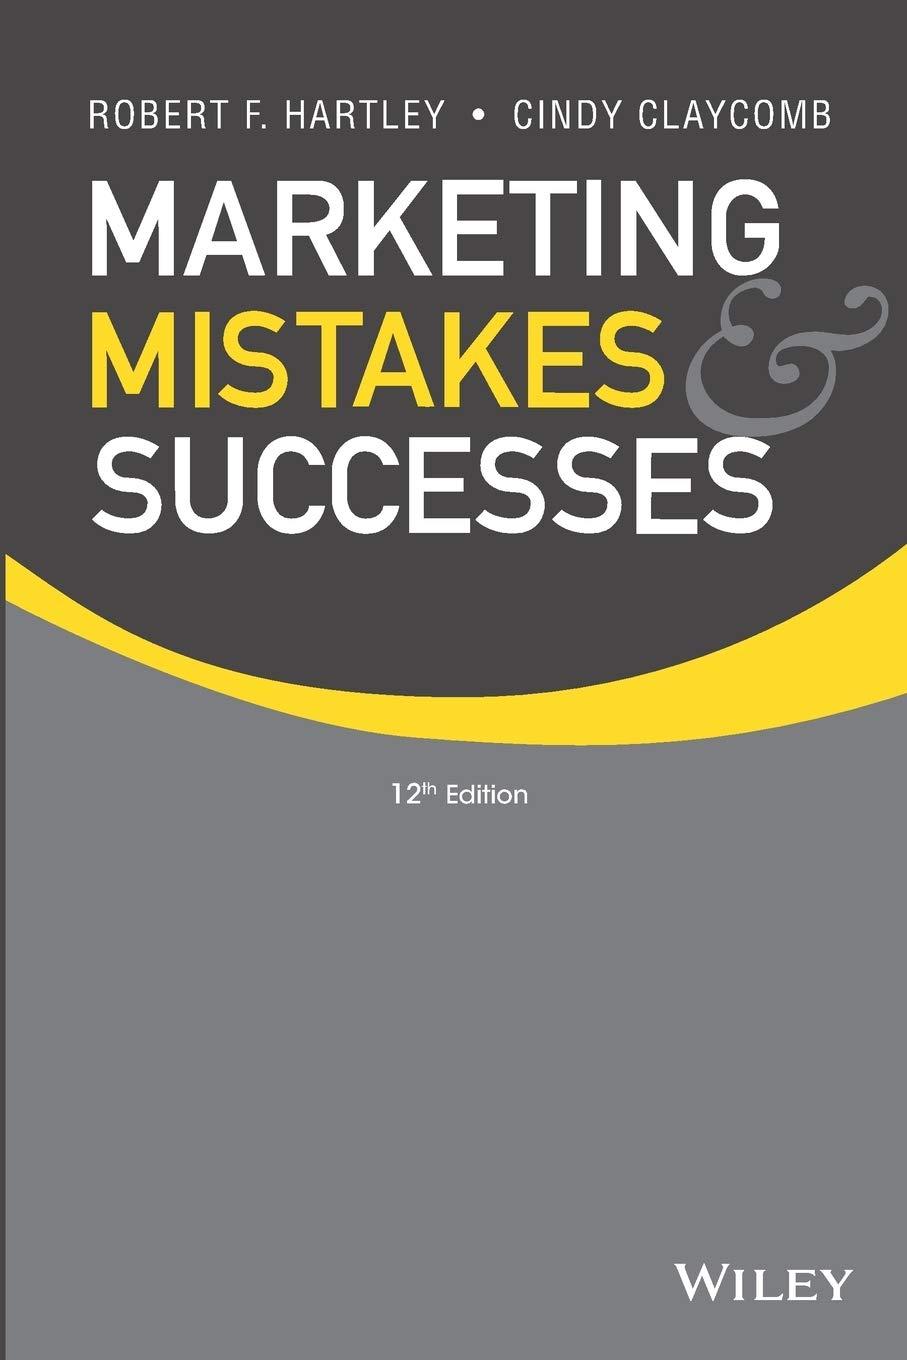 marketing mistakes and successes 12th edition robert f. hartley , cindy claycomb 1118078462, 978-1118078464